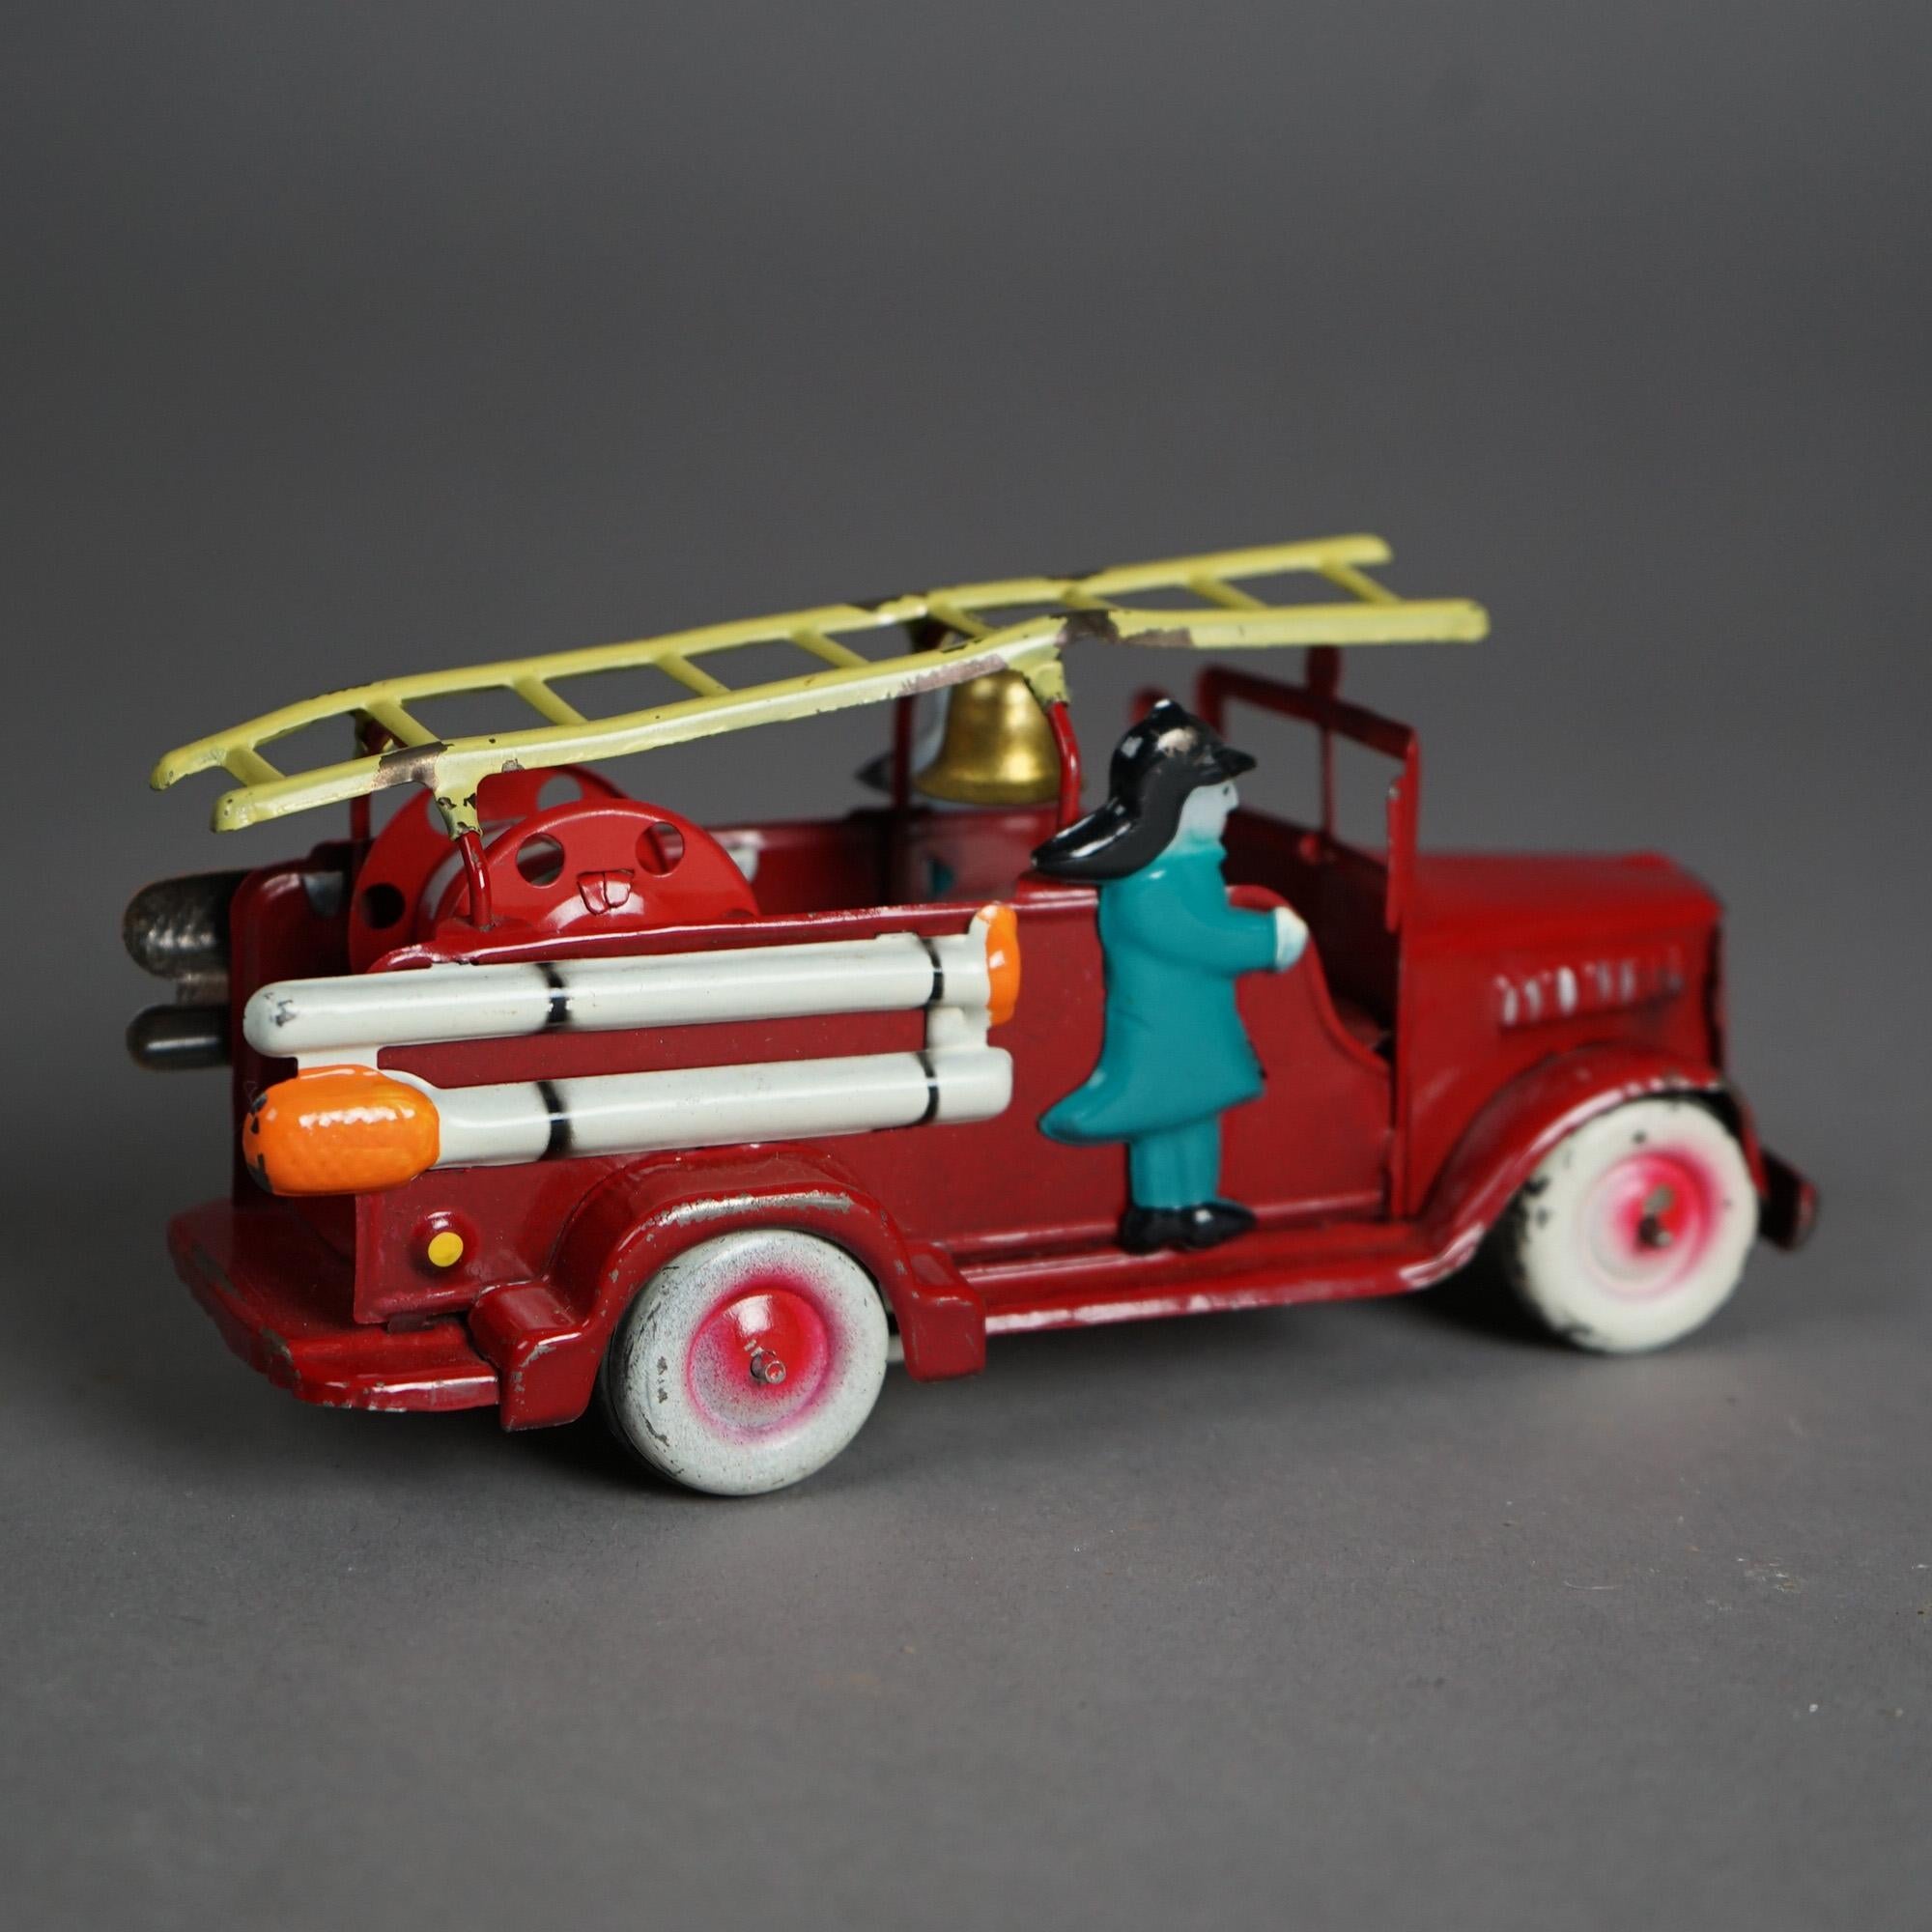 Japanese Tin Litho Toy Fire Engine In The Original Box by KAT, Circa 1950

Measures - 3